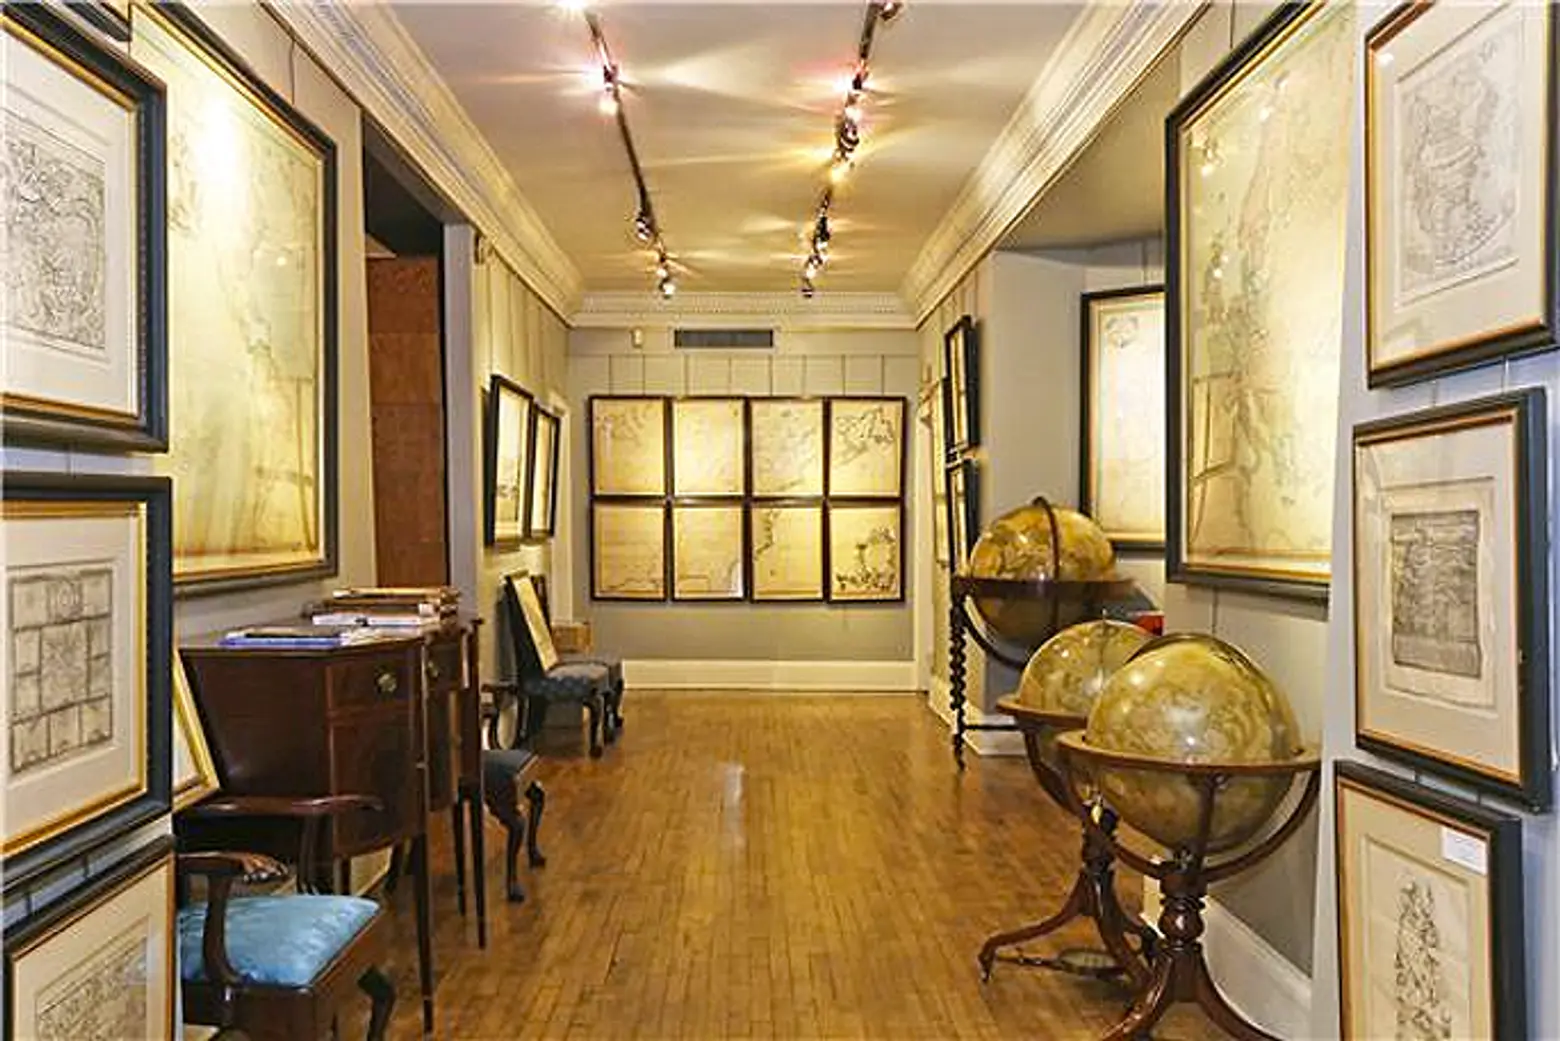 Map Out Your New Home or Art Gallery in This $20M Upper East Side Co-Op